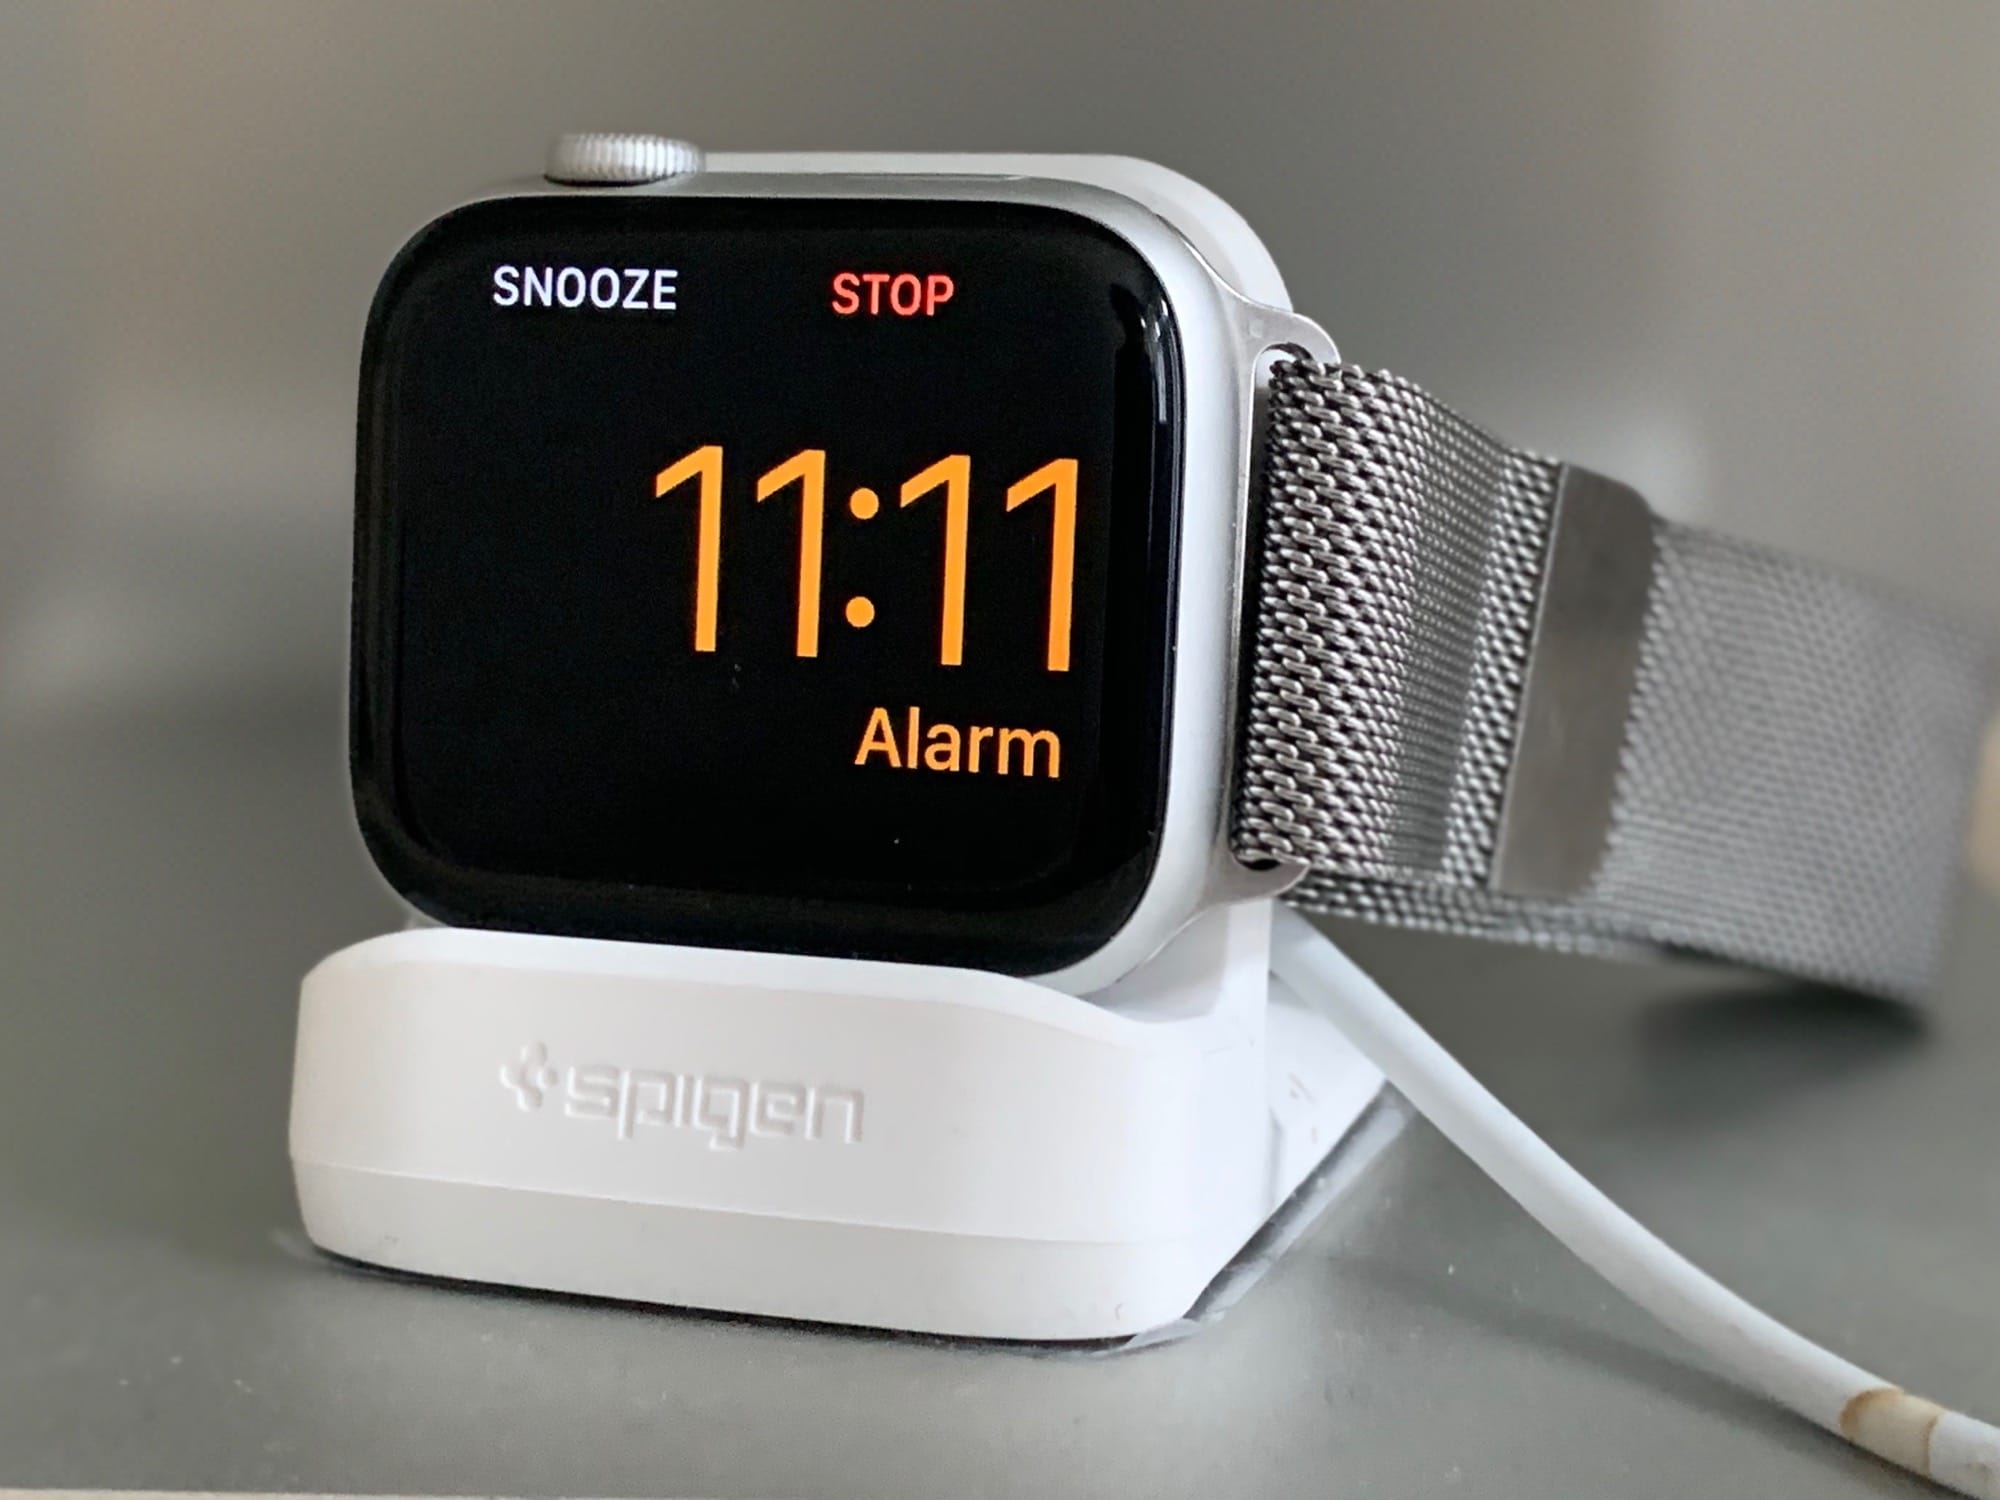 Snooze or stop an alarm in Apple Watch nightstand mode. 